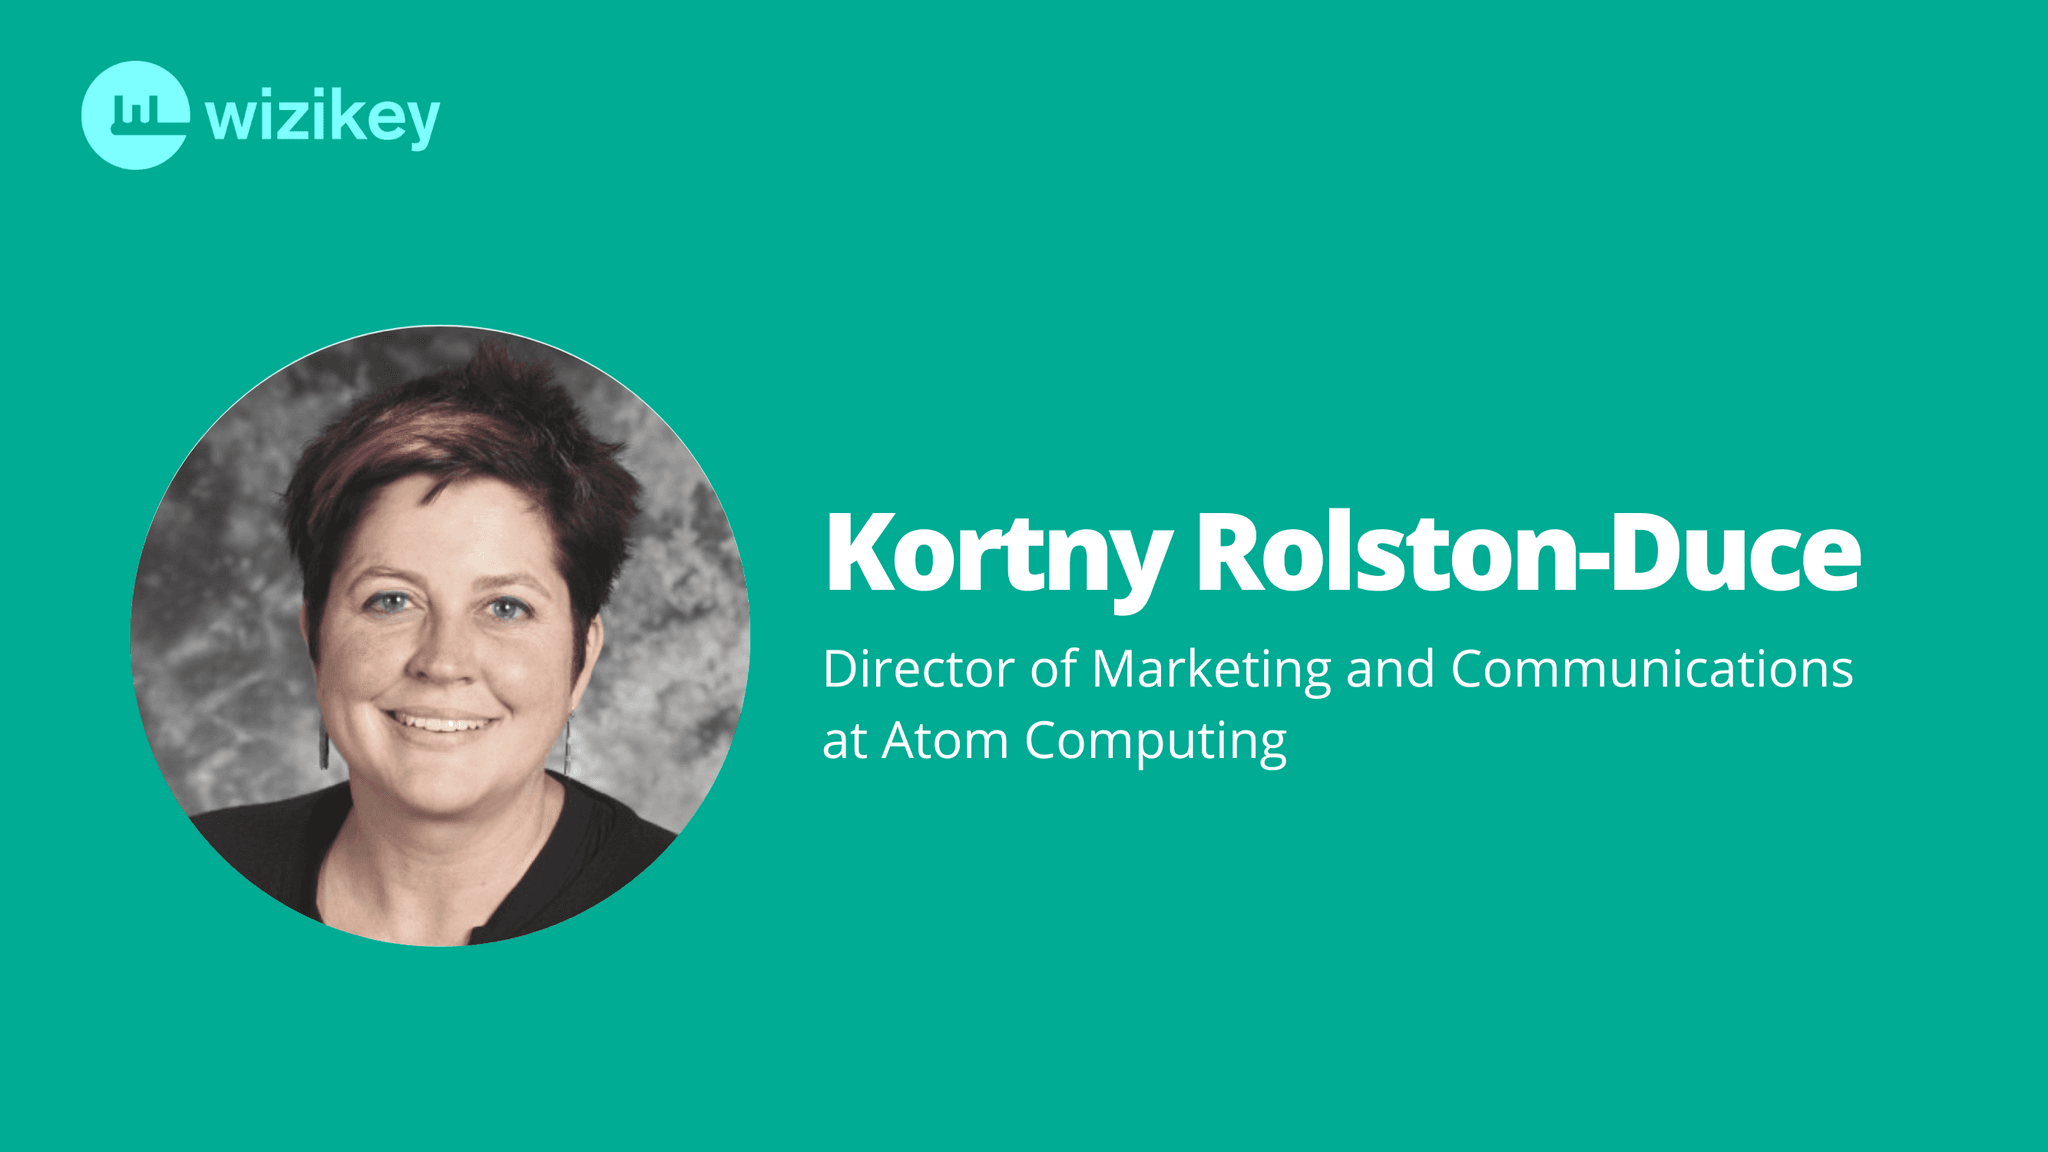 “Engagement is an important metric as it indicates a higher level of audience interest and provides insight into the individuals involved.”- Kortny from Atom Computing